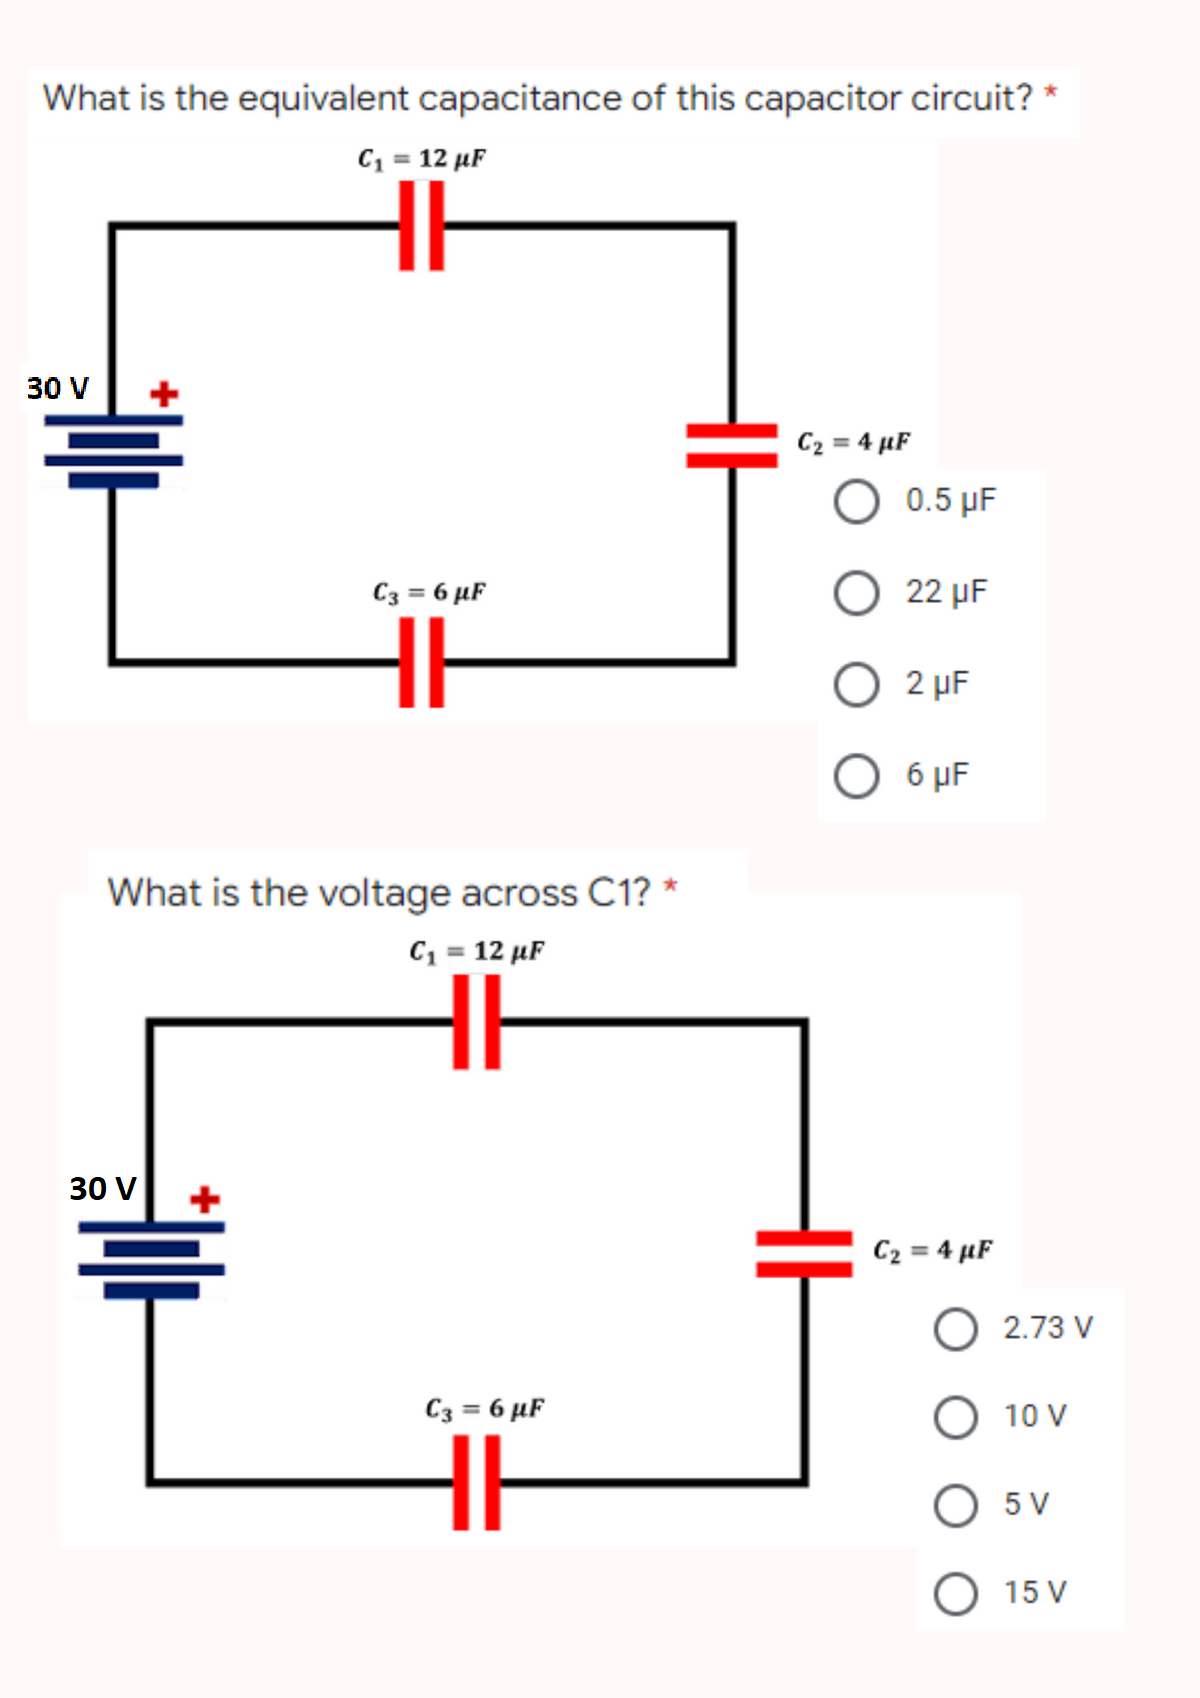 What is the equivalent capacitance of this capacitor circuit? *
C₁ = 12 µF
30 V
C₂ = 4 μF
IH
C3 = 6 μF
What is the voltage across C1? *
C₁ = 12 µF
HH
30 V
C3 = 6 µF
HH
Ful
0.5 µF
22 μF
O 2 μF
O 6 μF
C₂ = 4 µF
O 2.73 V
O 10 V
O 5V
O 15 V